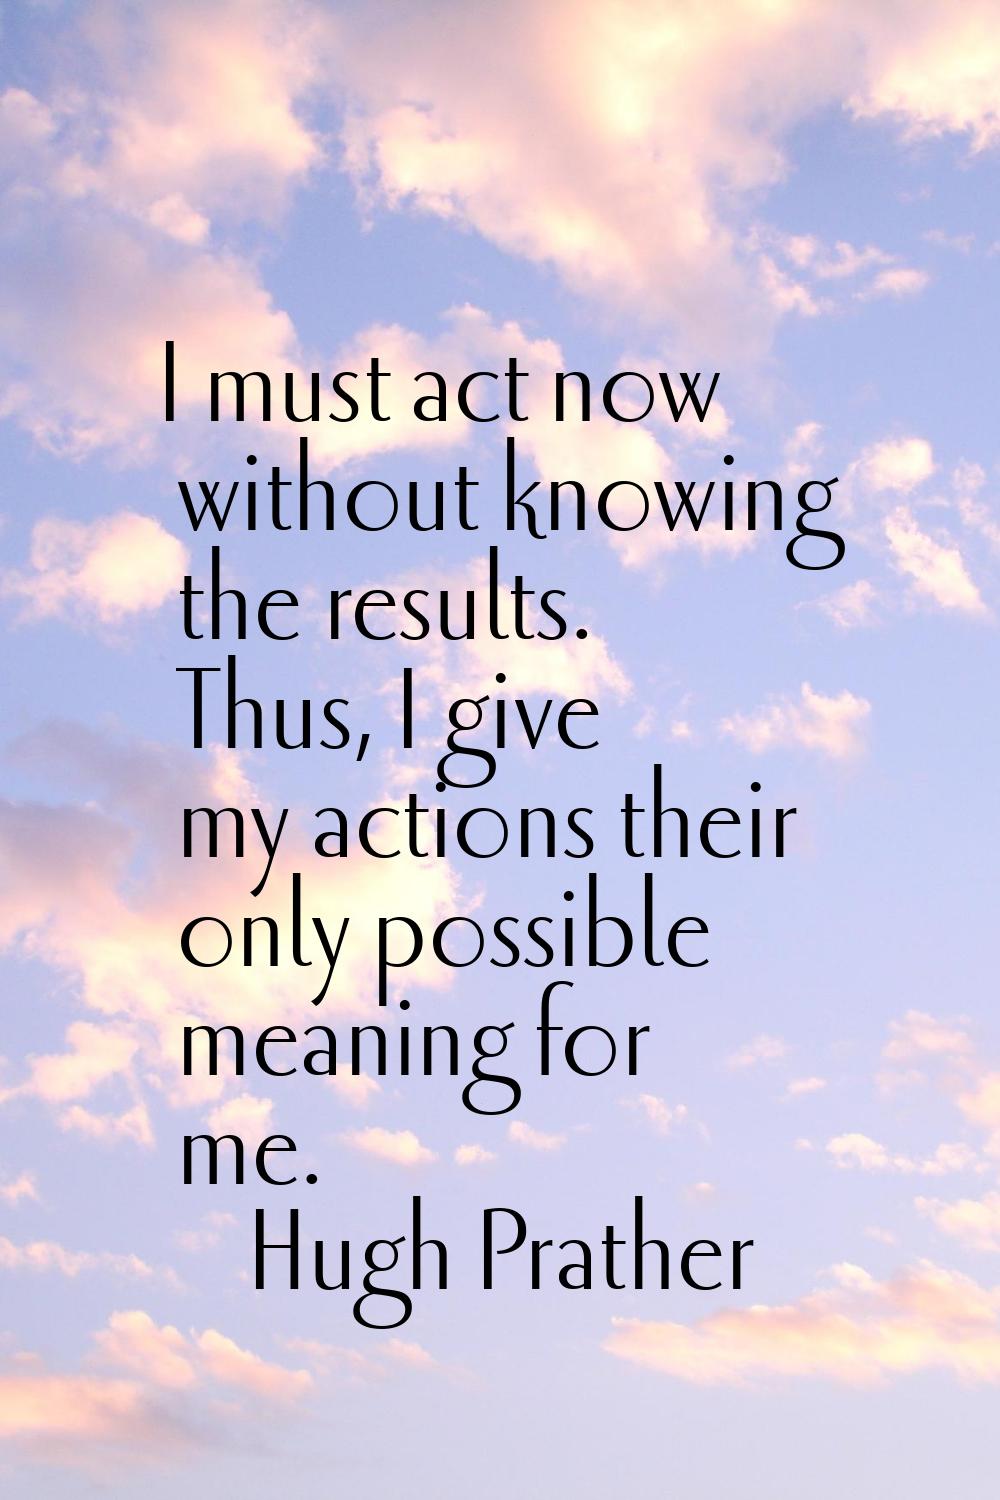 I must act now without knowing the results. Thus, I give my actions their only possible meaning for